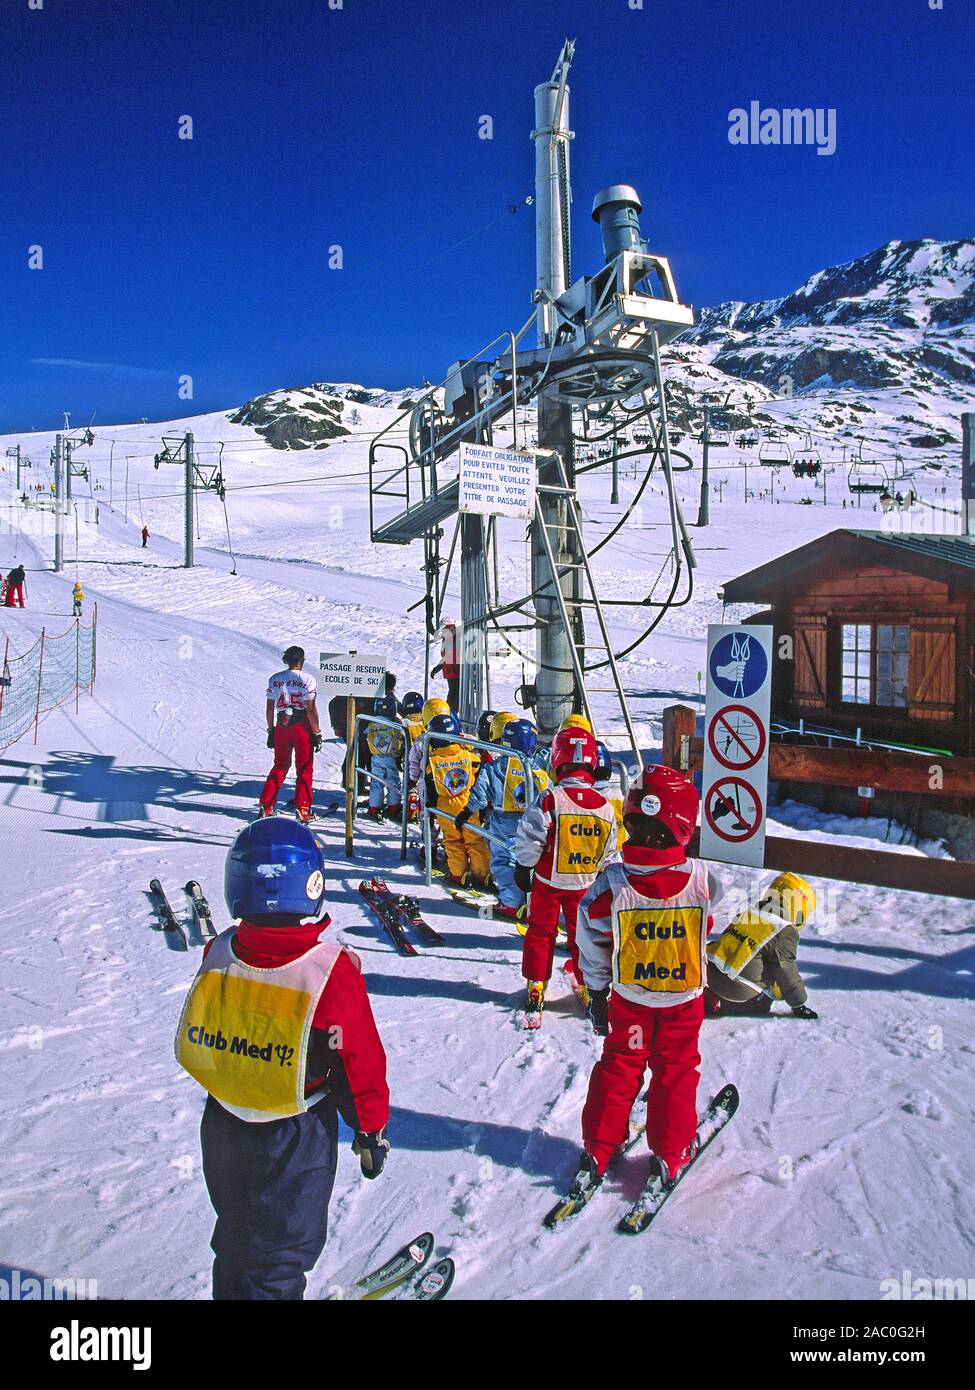 Children waiting for the ski lift at the resort of Alpe d'Huez Isere Stock  Photo - Alamy